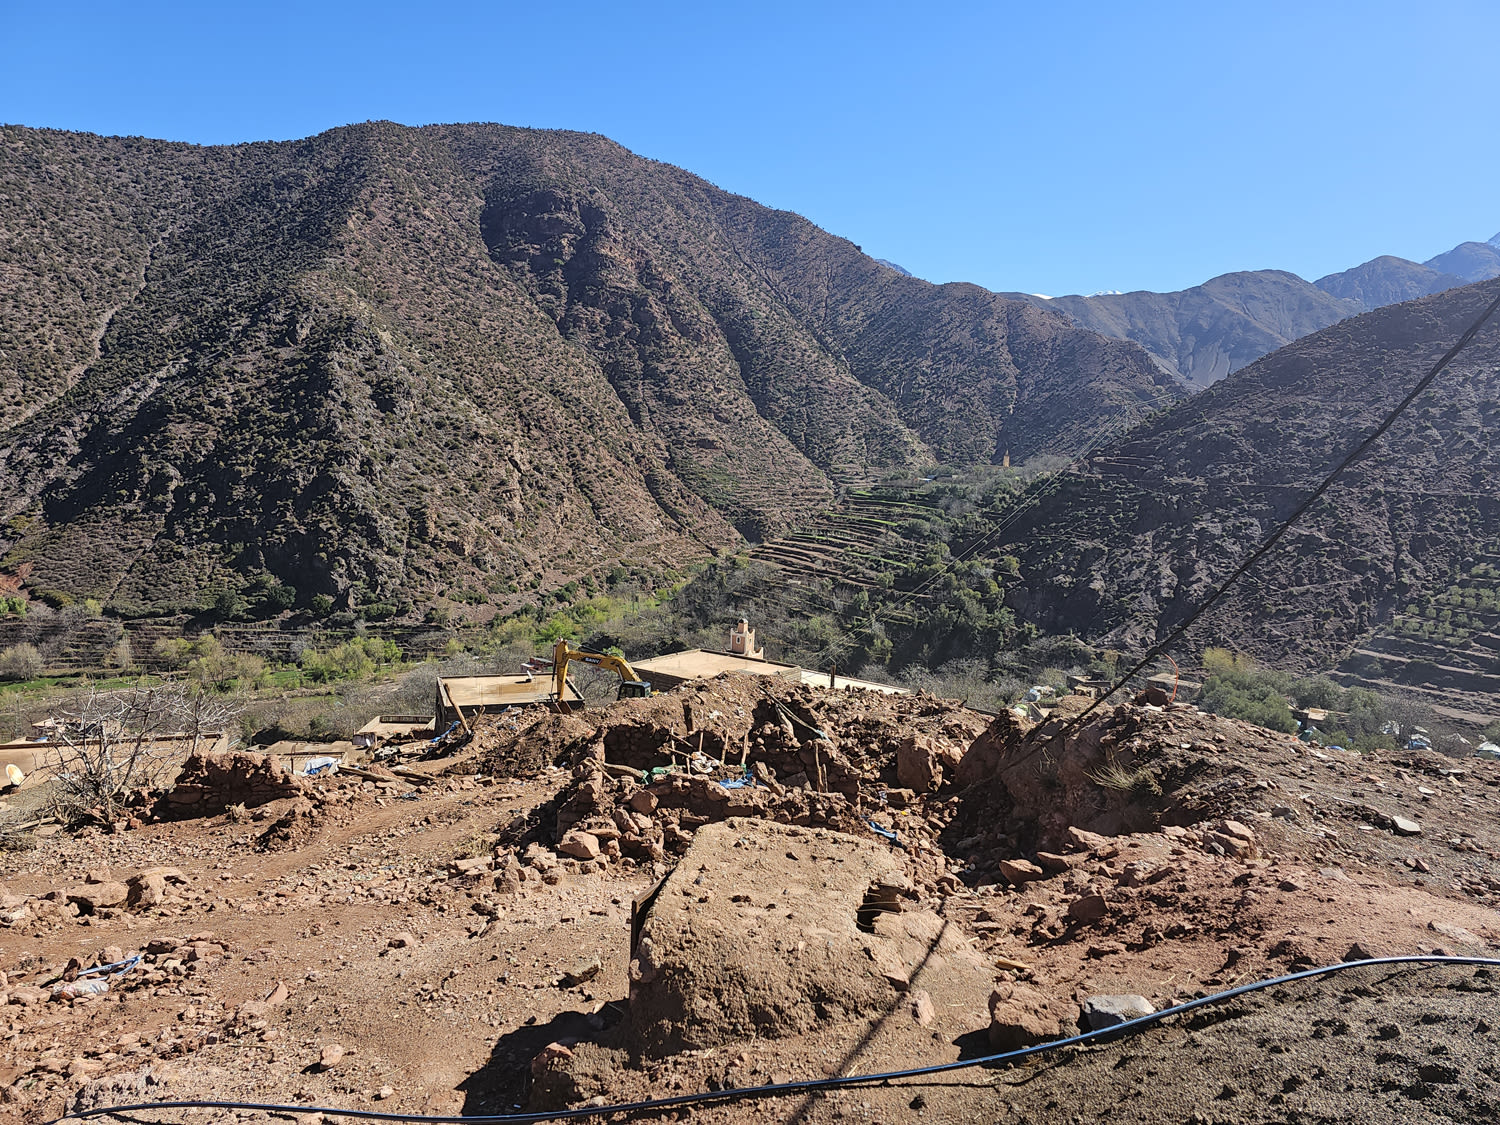 Rebuilding begins in Imi Oughad